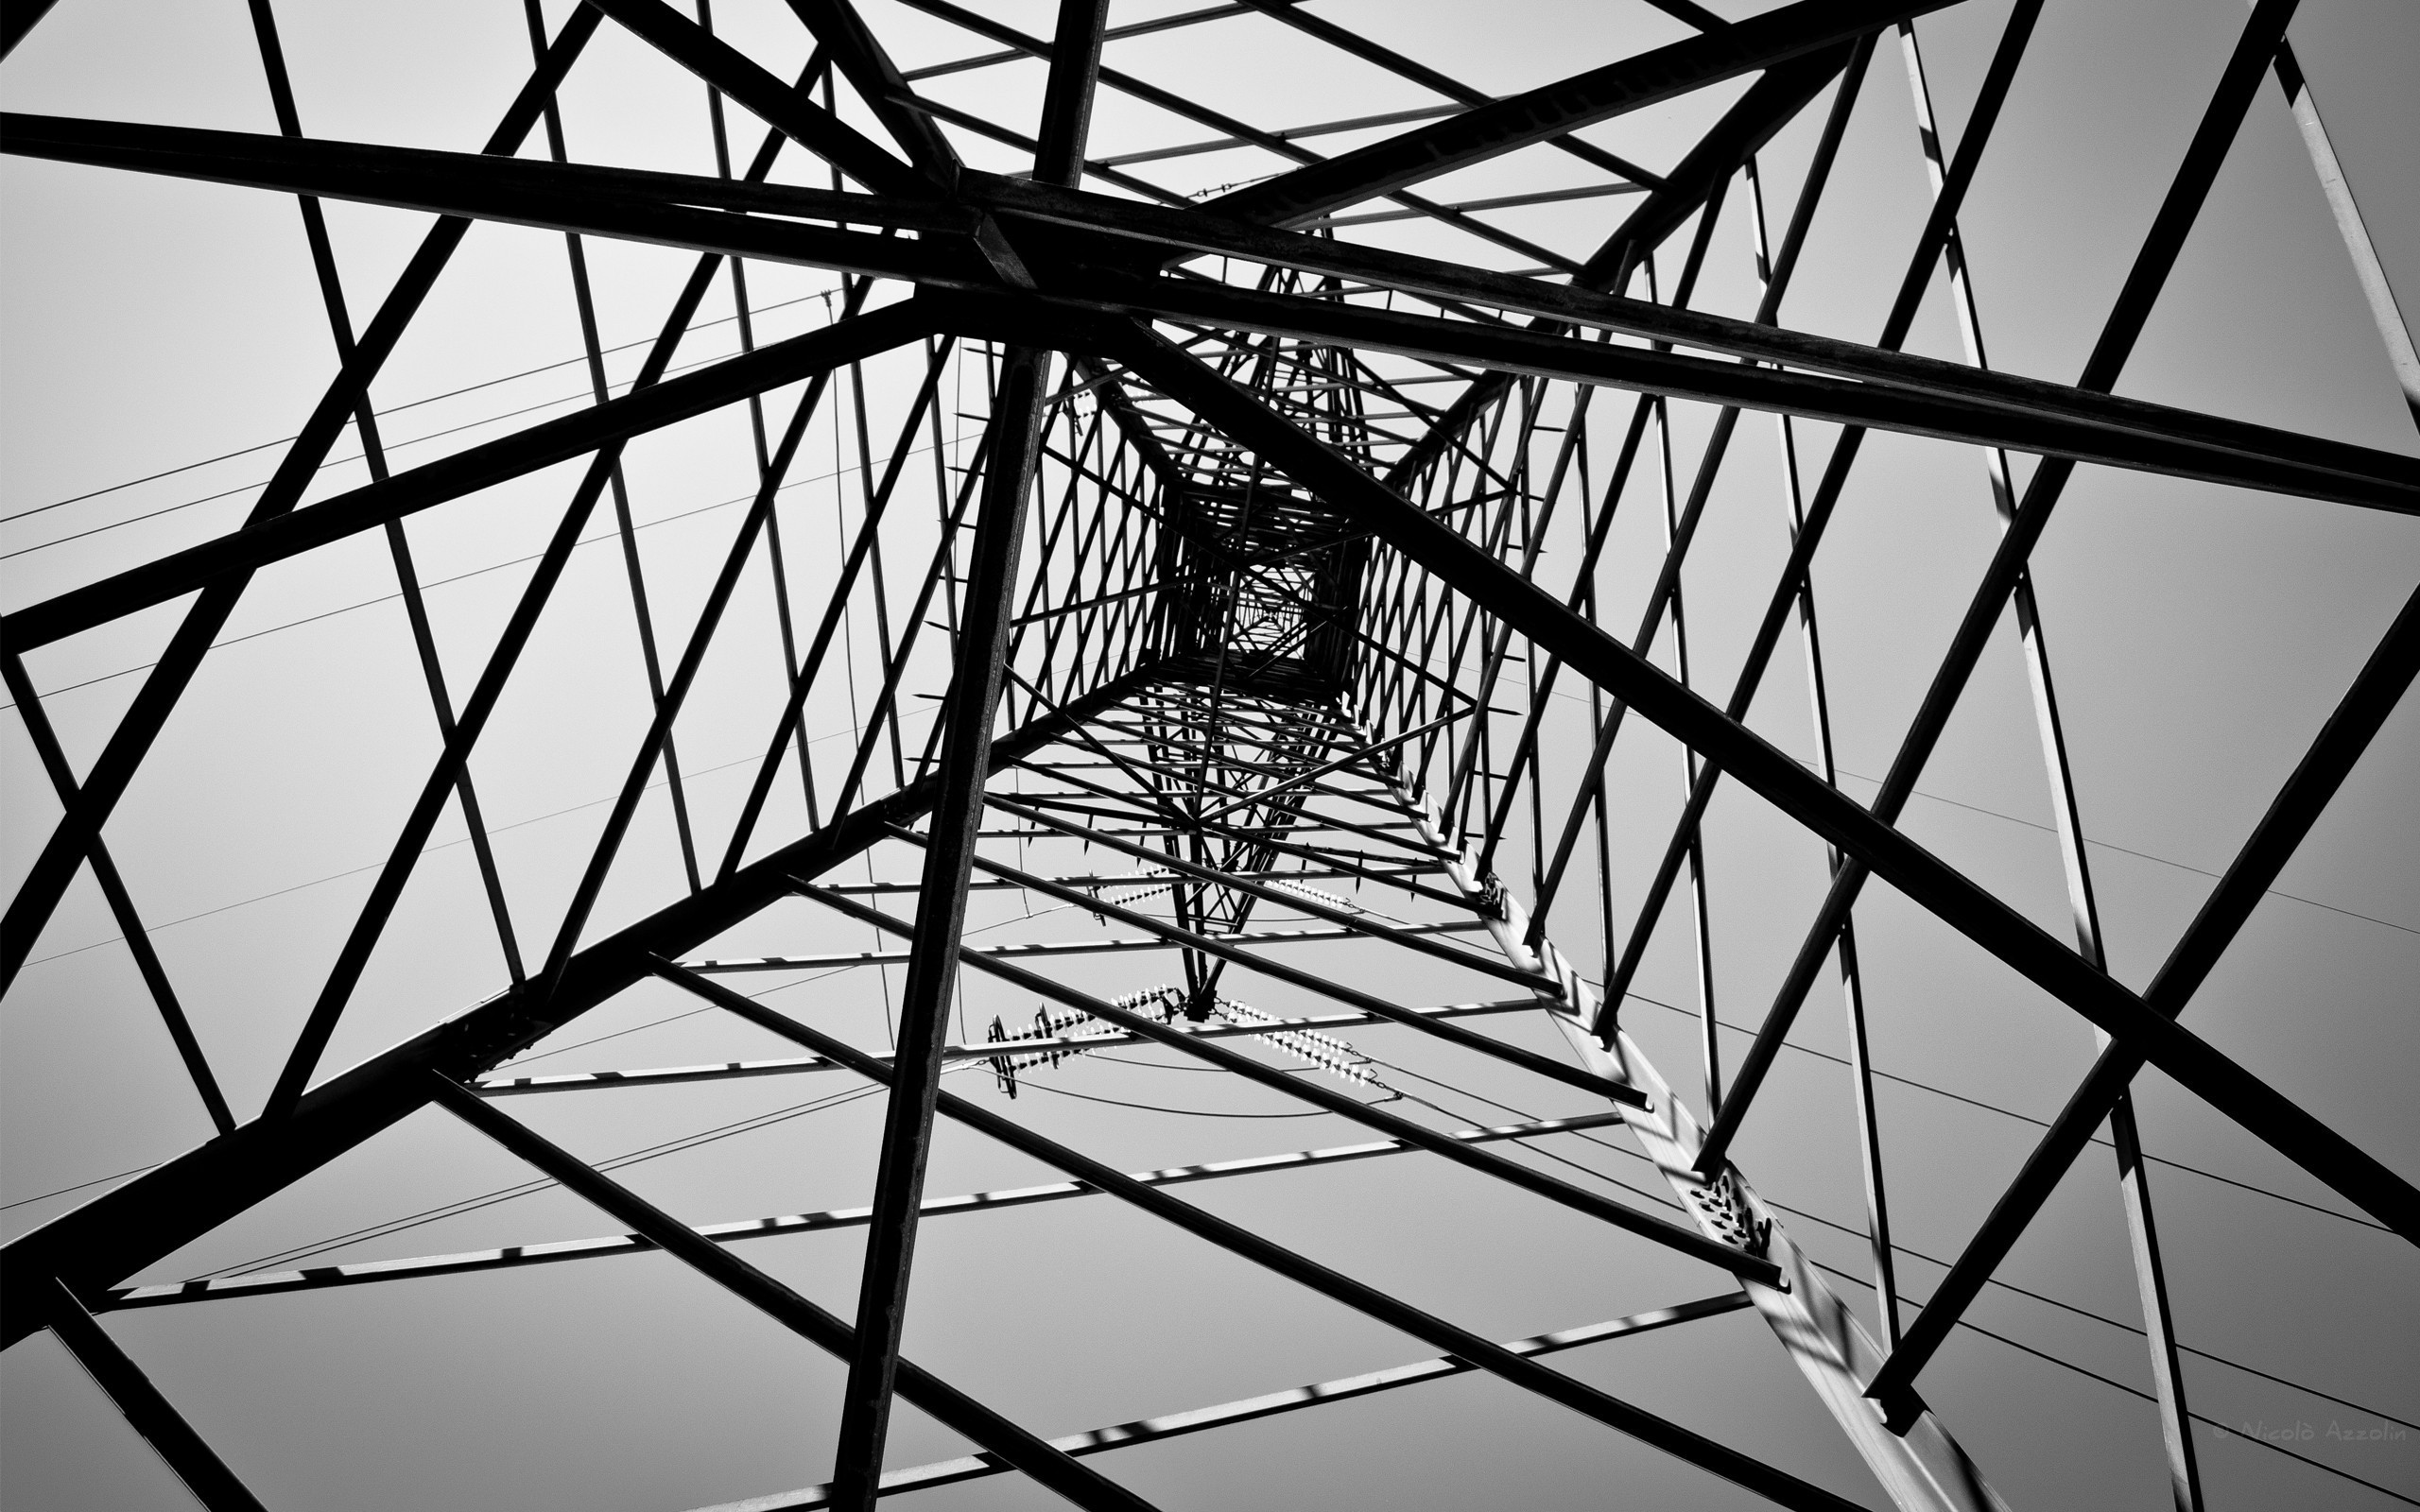 Electricity Pole Perspective Wallpapers And Stock Photos - Desktop Wallpaper Hd Perspective - HD Wallpaper 